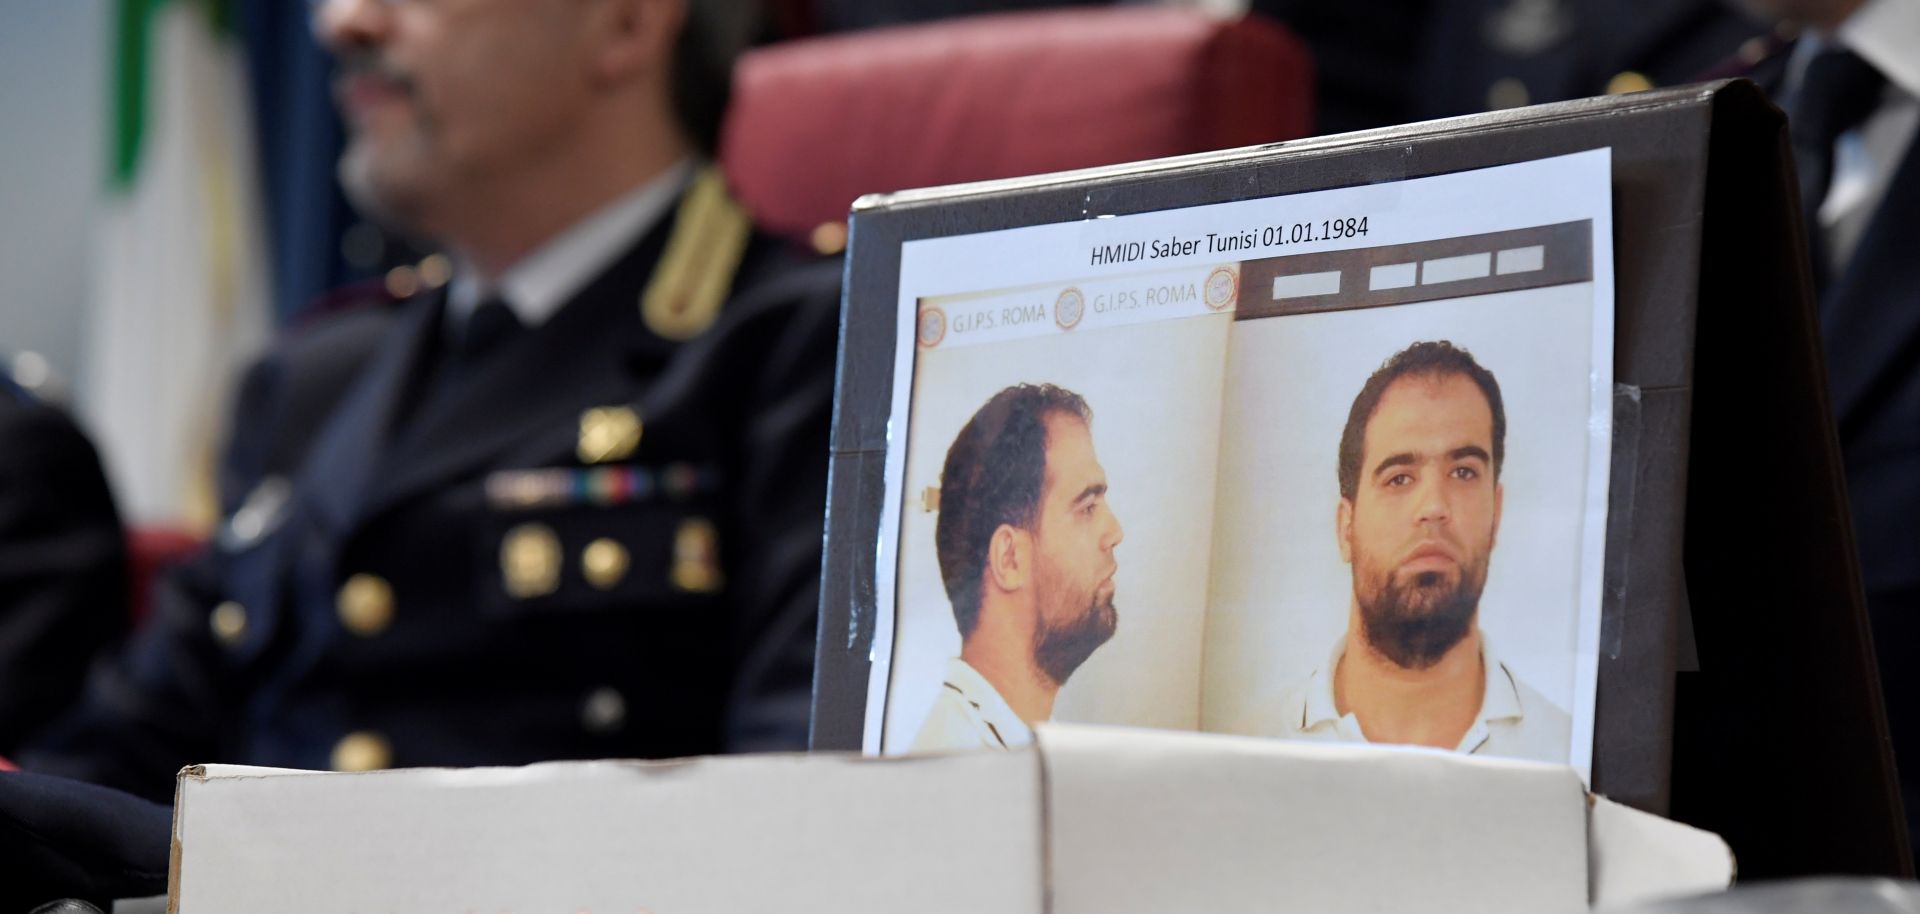 The mugshot of Hmidi Saber, a suspected member of Ansar al-Sharia is displayed at a press conference.